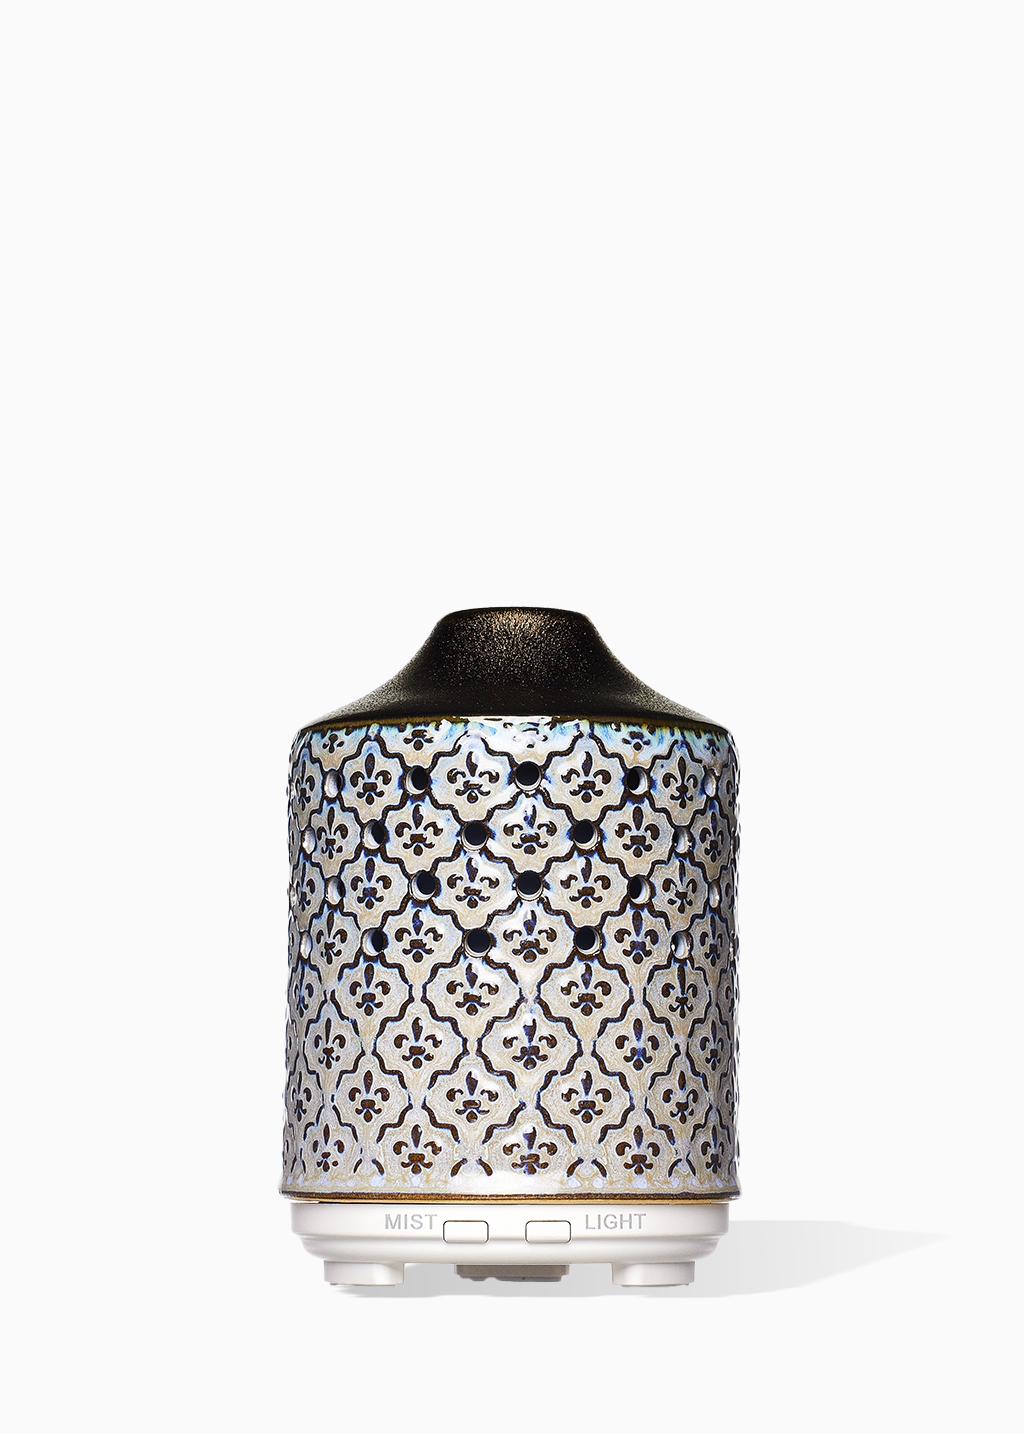 Ceramic diffuser, lily pattern